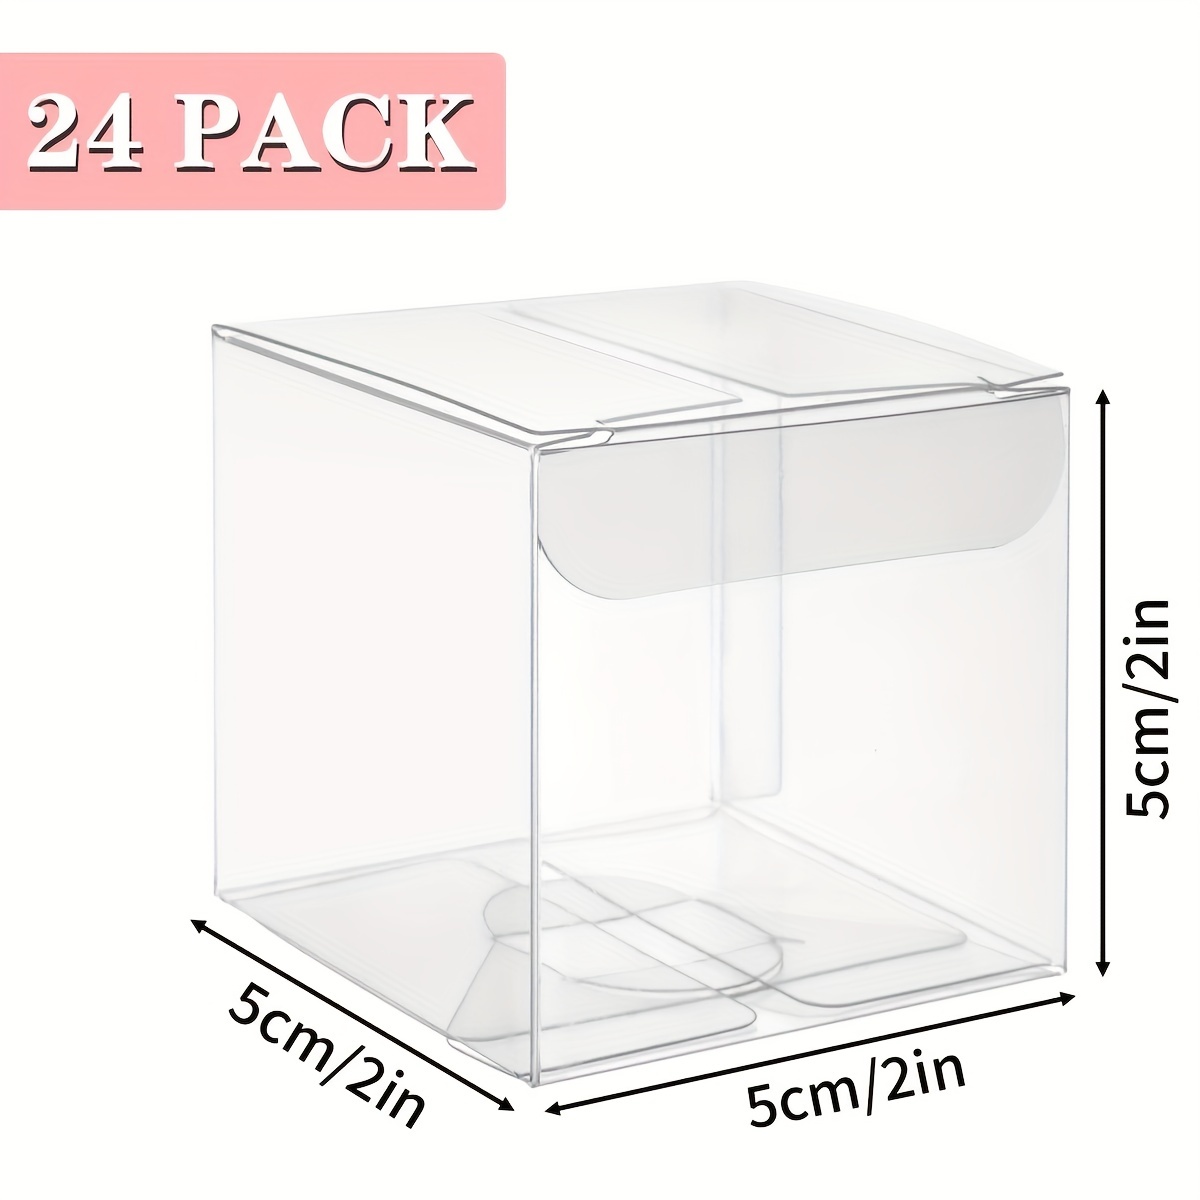 MultiCraft Clear Cube Favor Box Value Pack - 2 Piece - Large